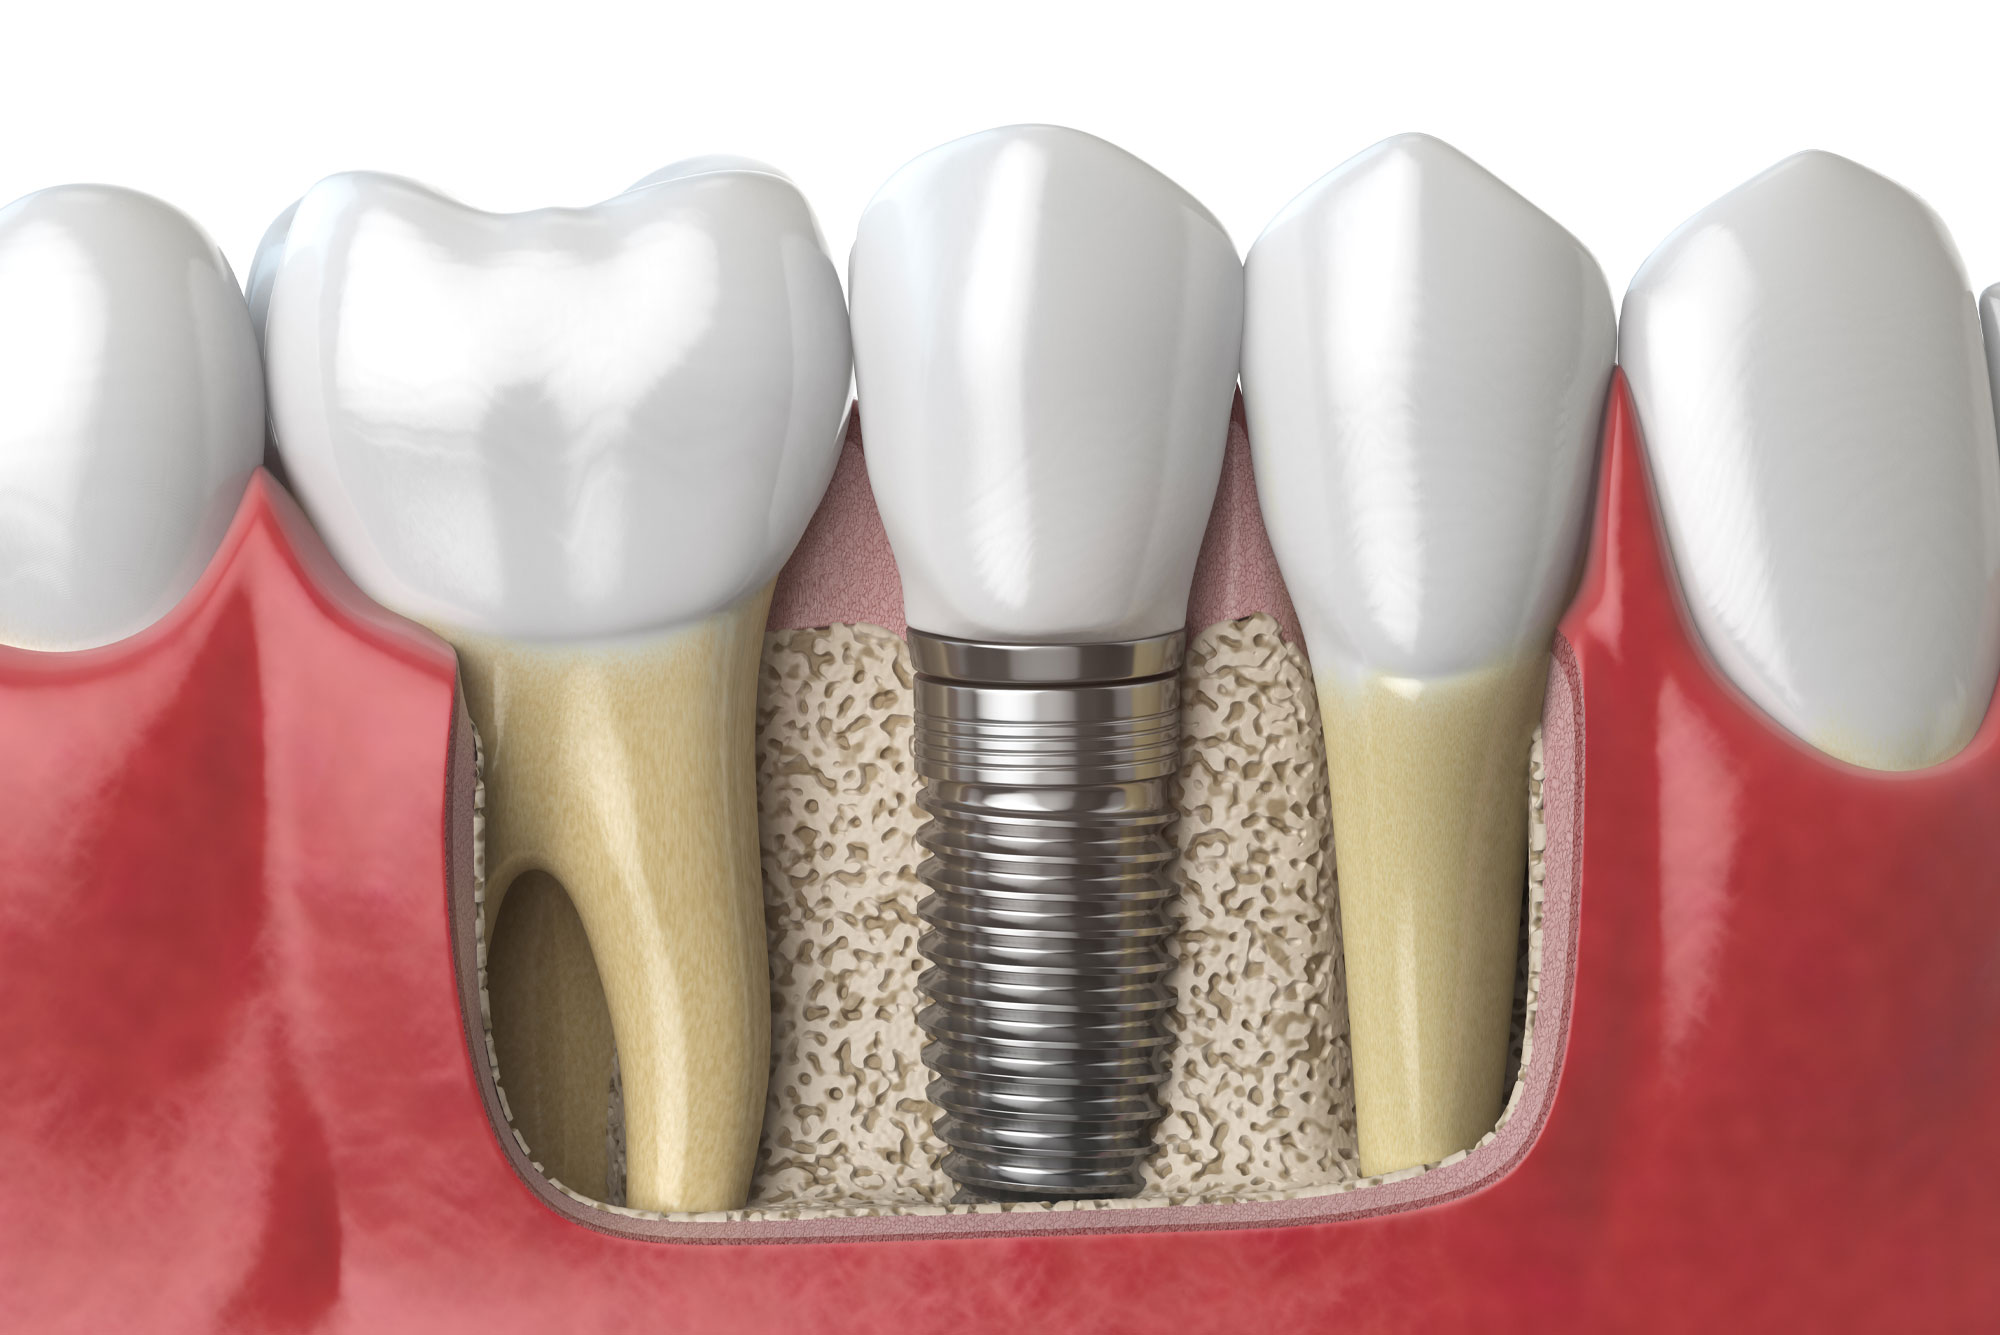 Dental Implants and Oral Surgery in Cudahy